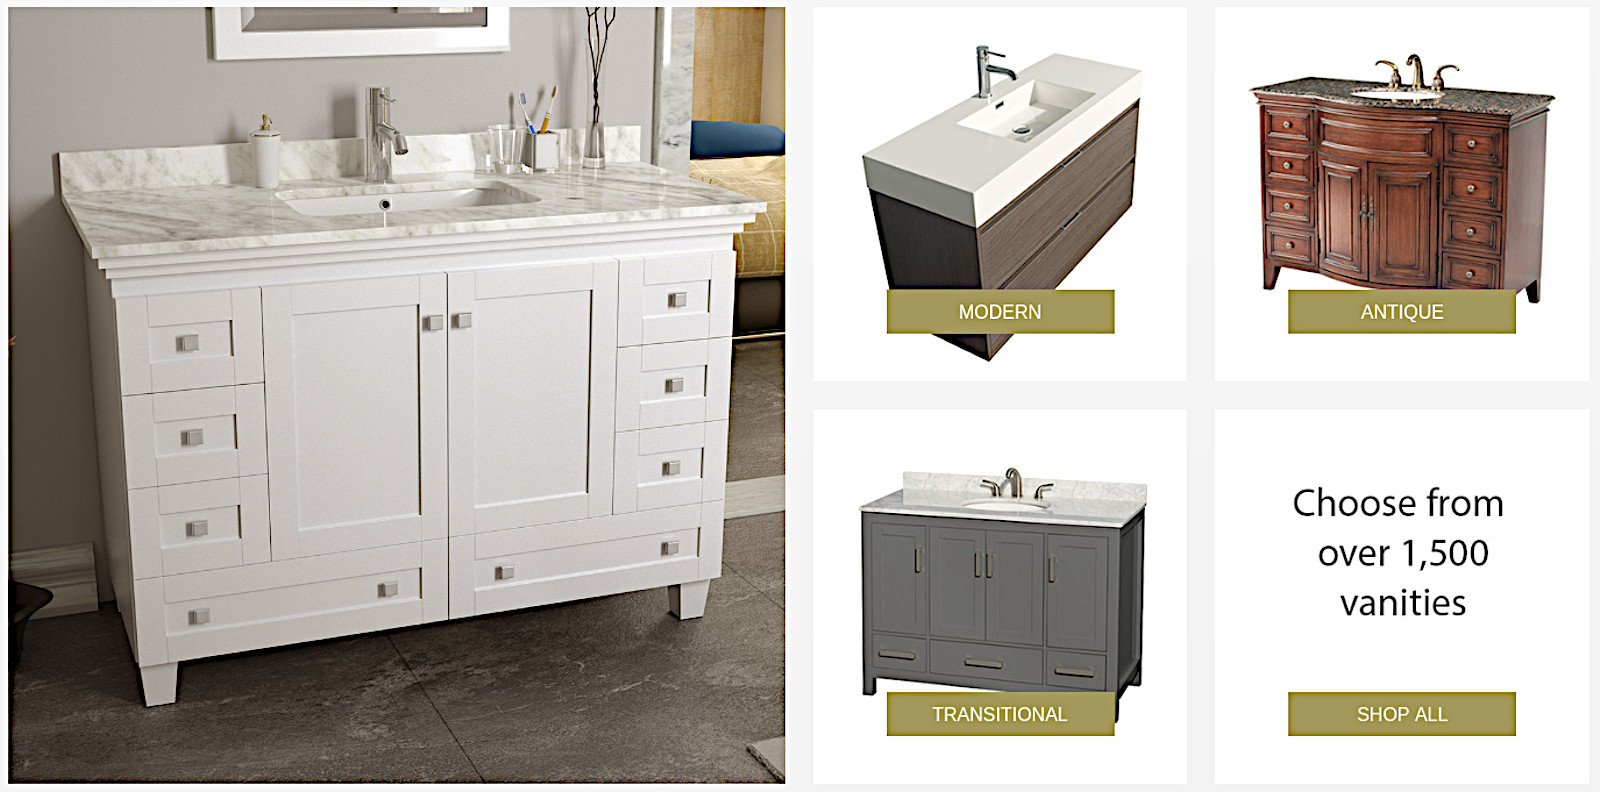 modern antique transitional vanities reduced price